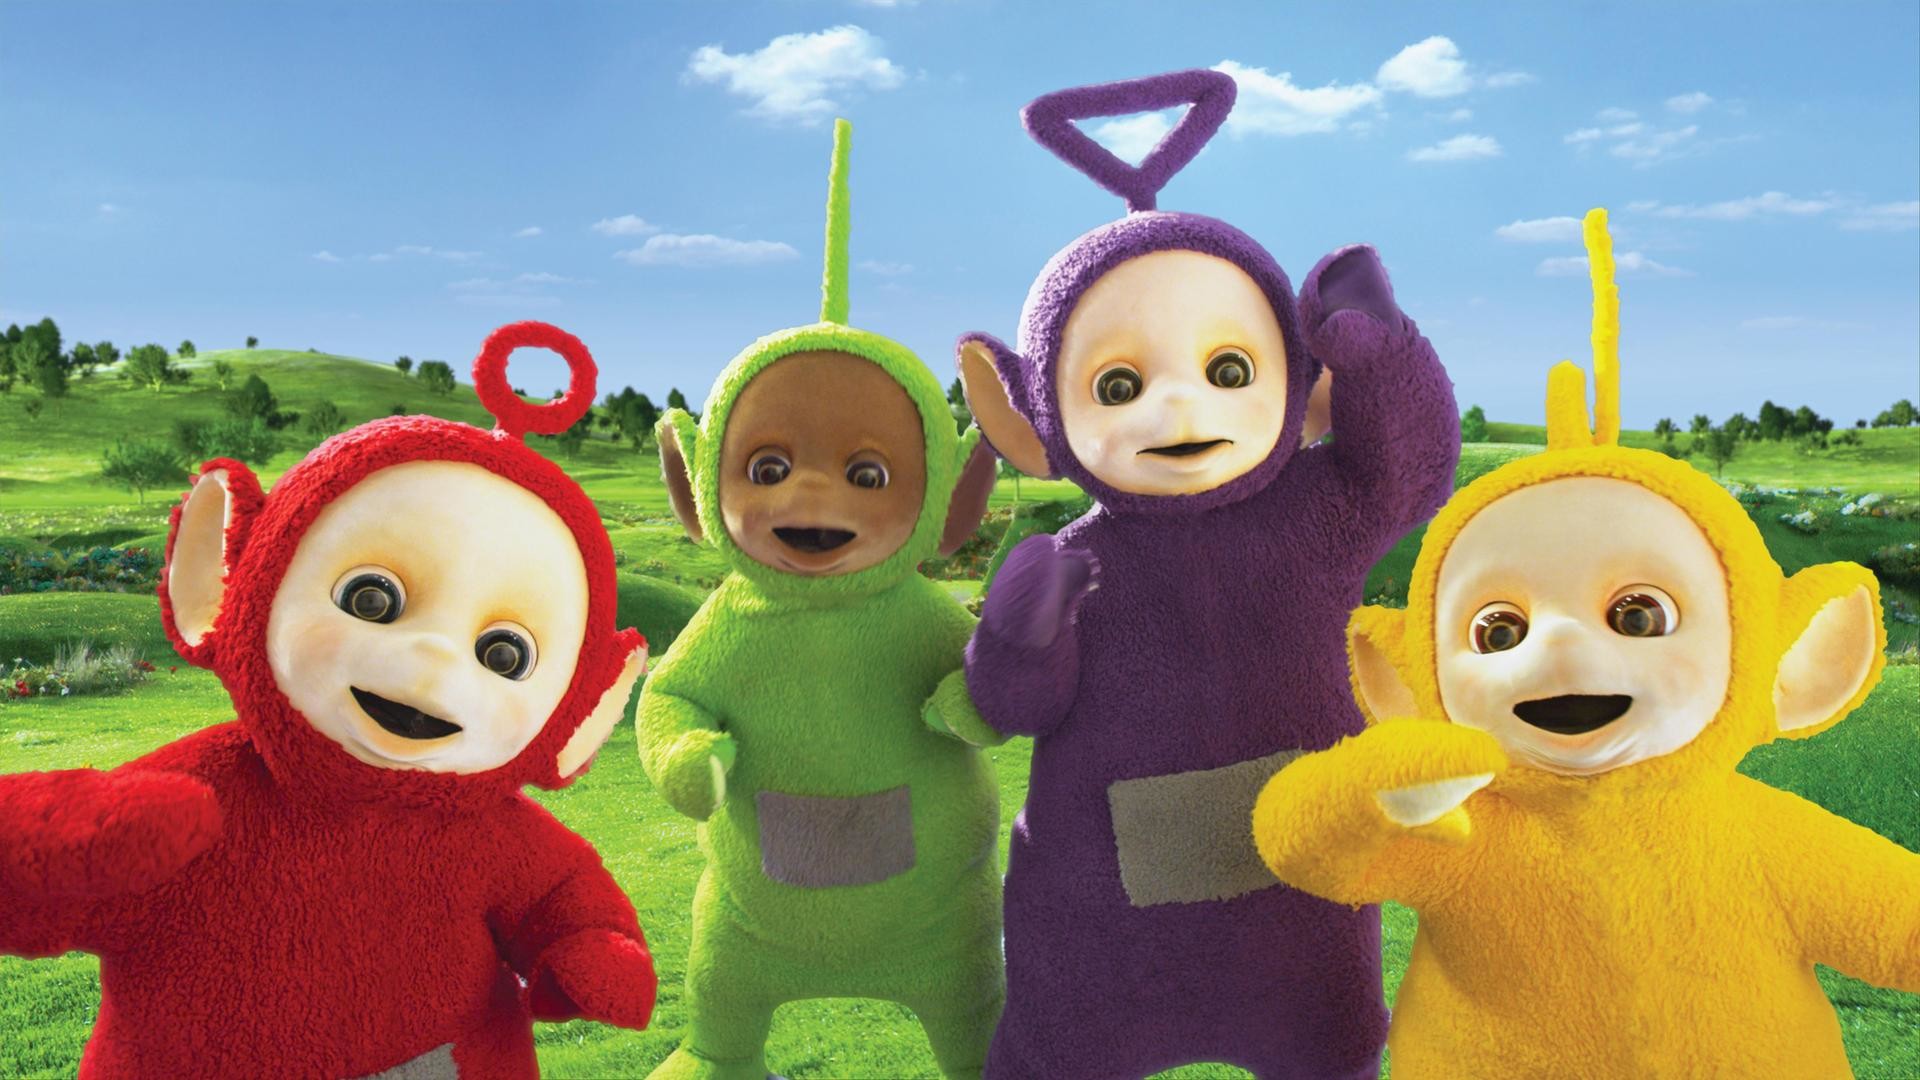 Los teletubbies del demonoid torrent what are some movies like martyrs torrent